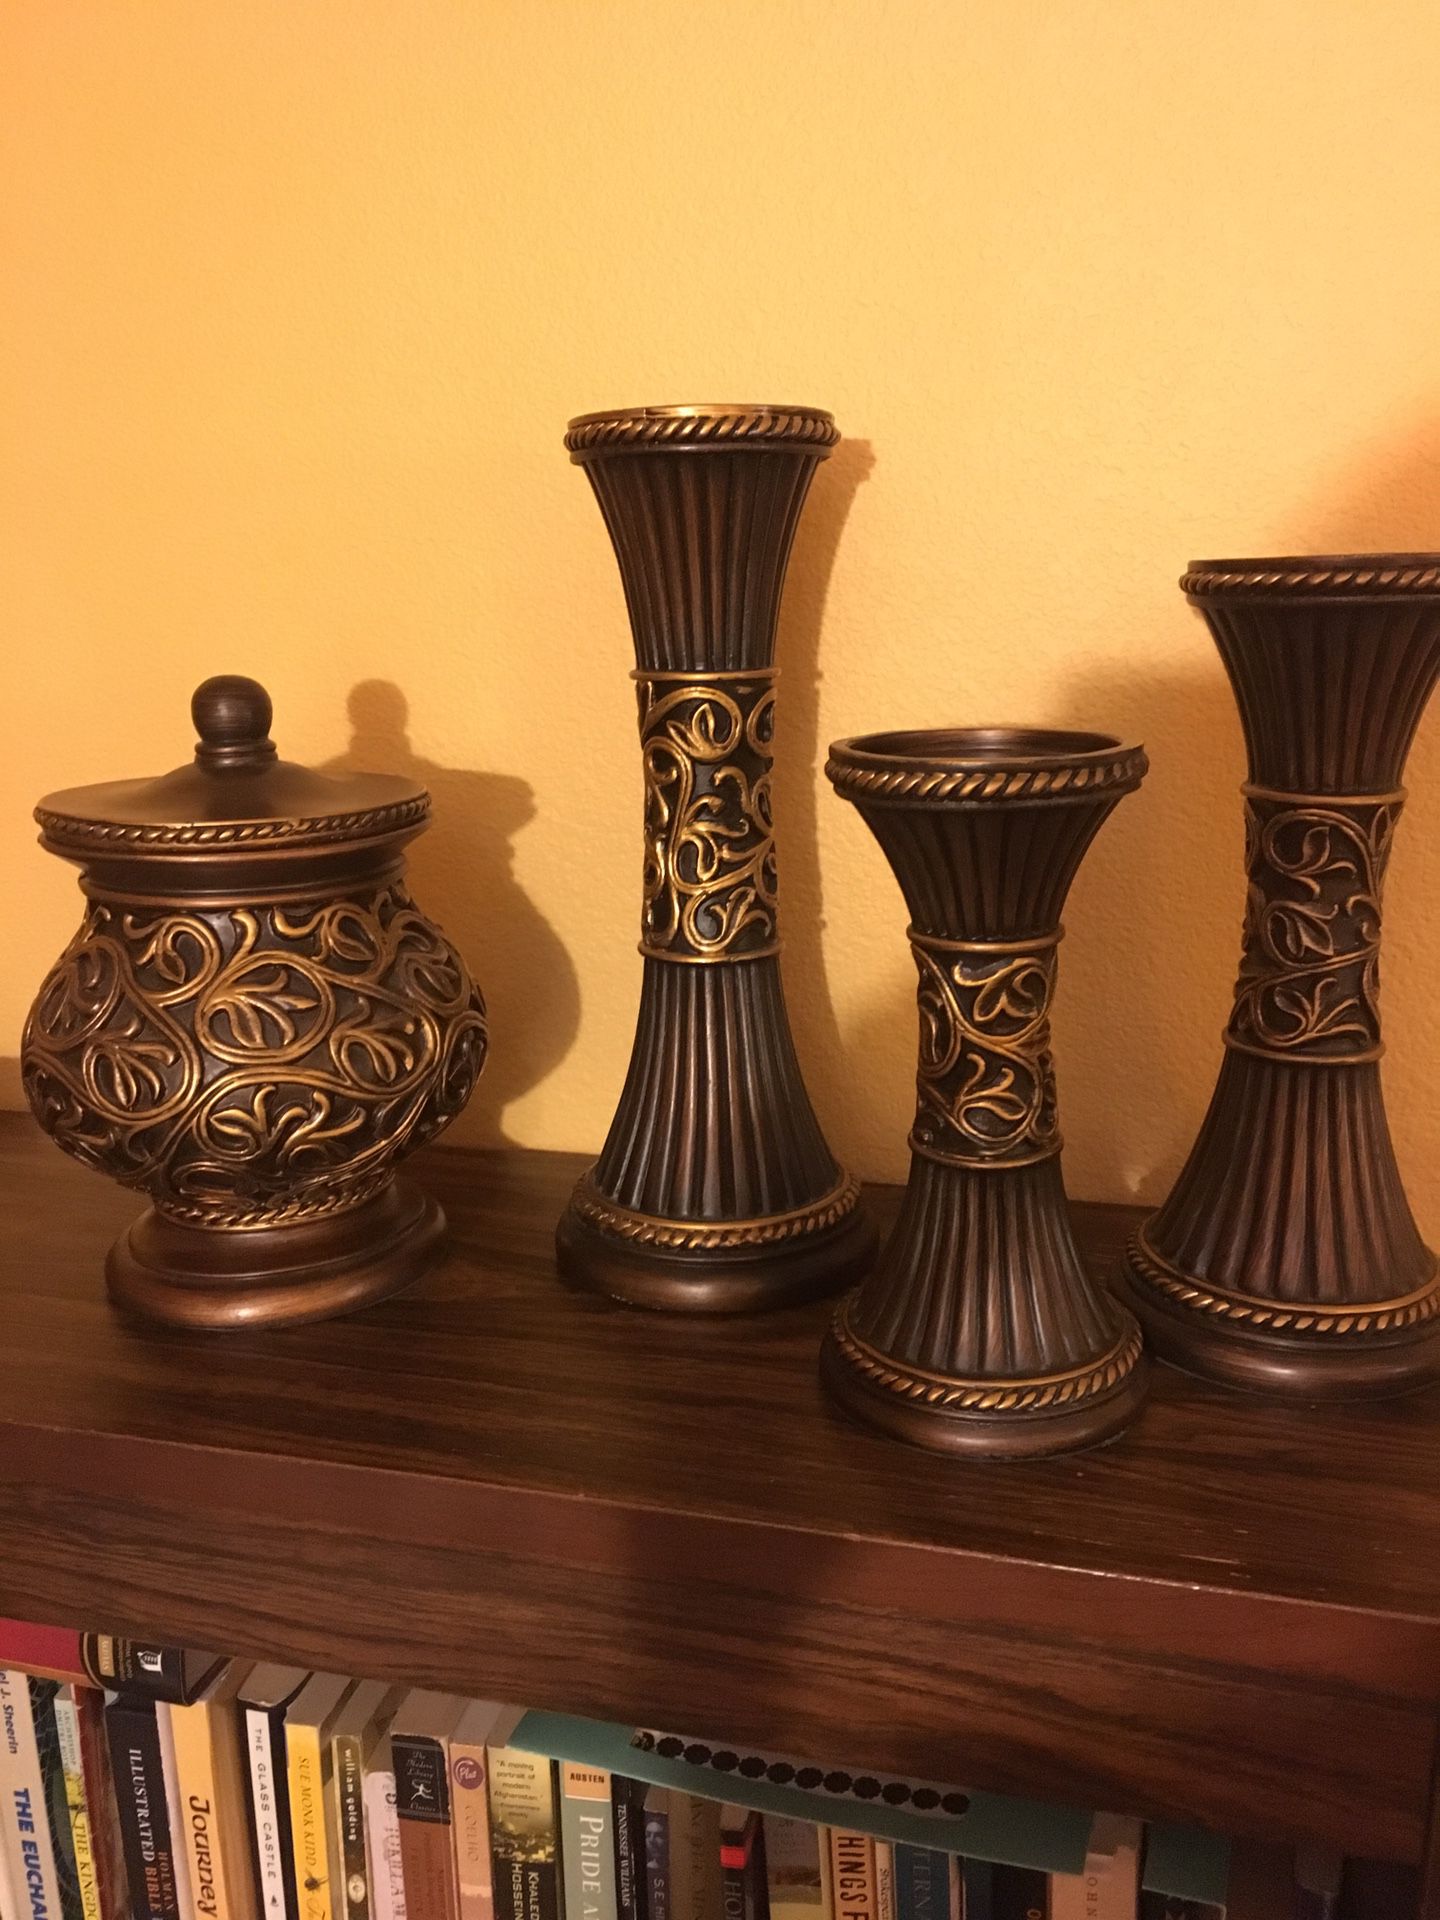 Set of 4 candle holders and vase